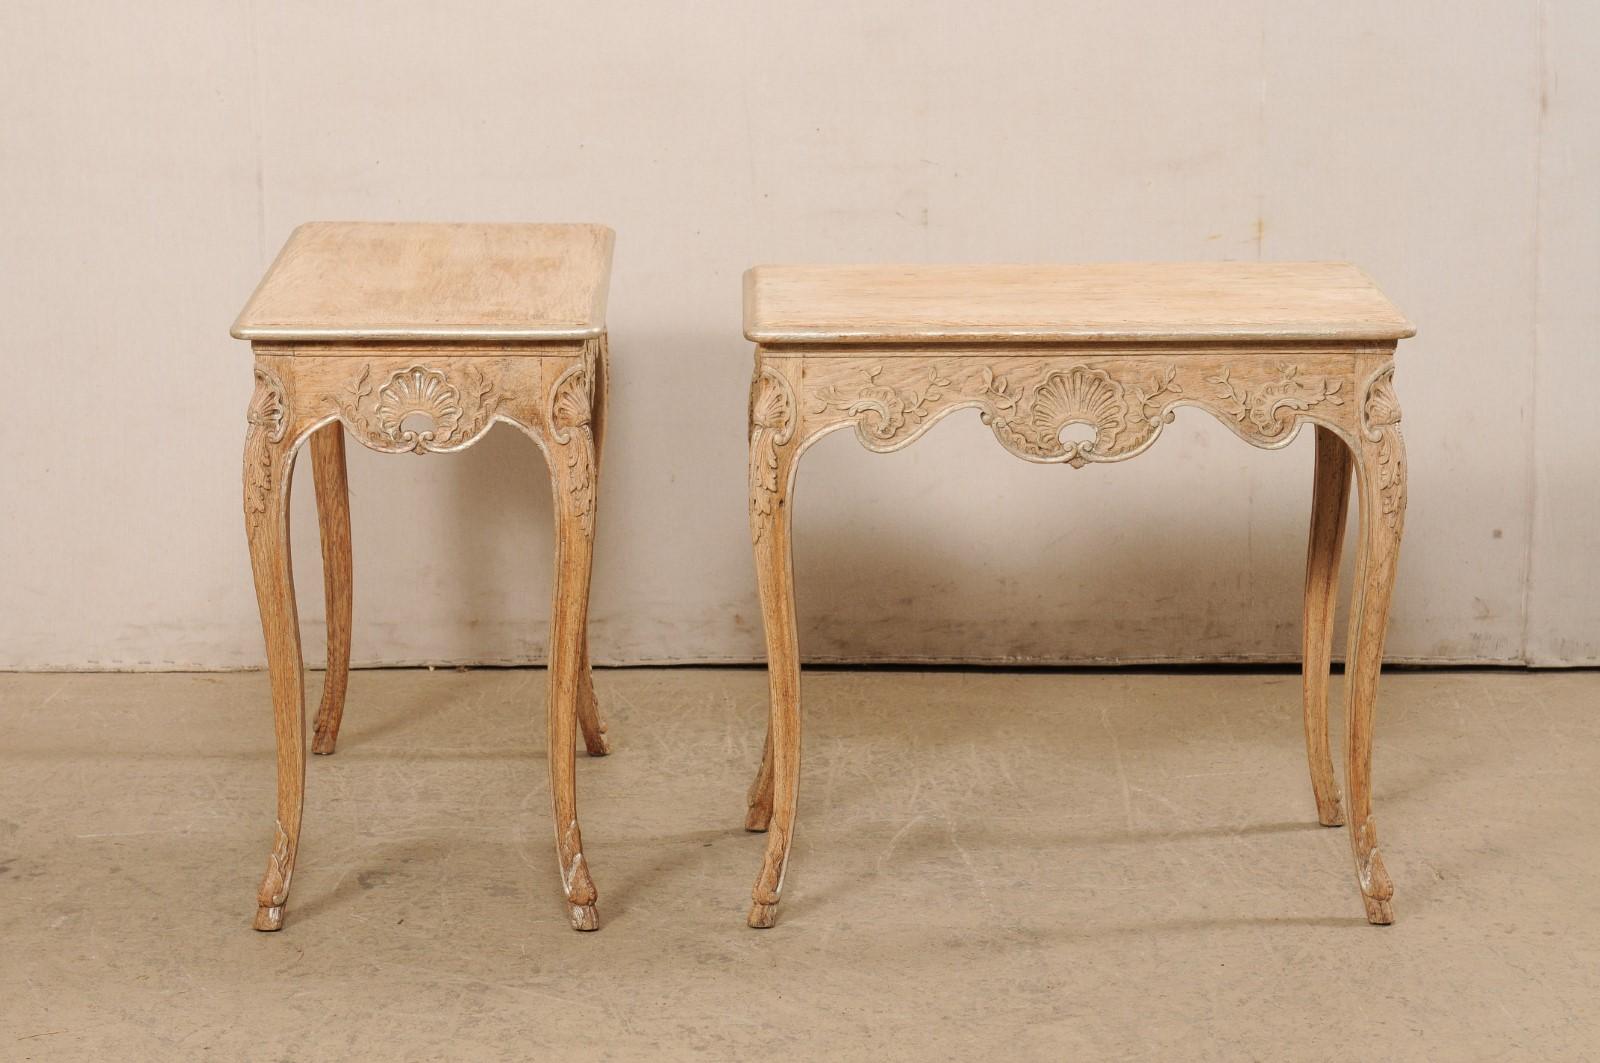 Wood French Early 20th C. End Tables w/Elegant Shell-Carved Skirts 'All Sides Carved' For Sale